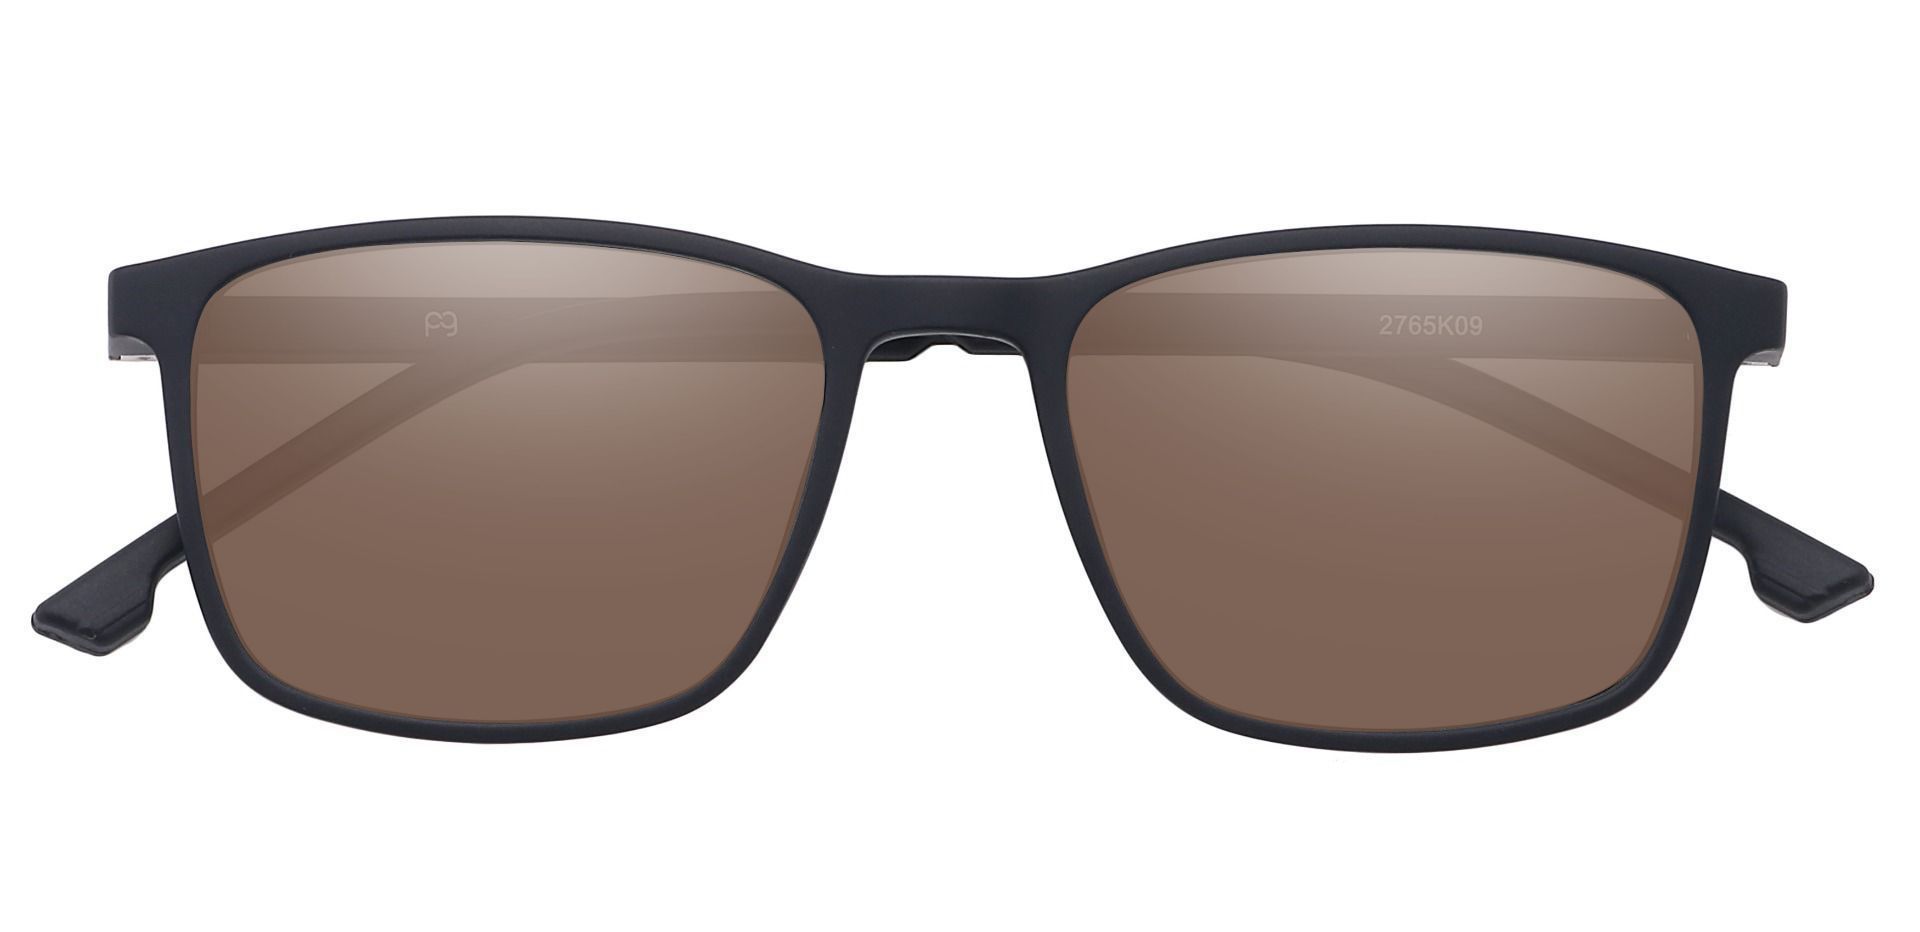 Franklin Rectangle Non-Rx Sunglasses - Black Frame With Brown Lenses